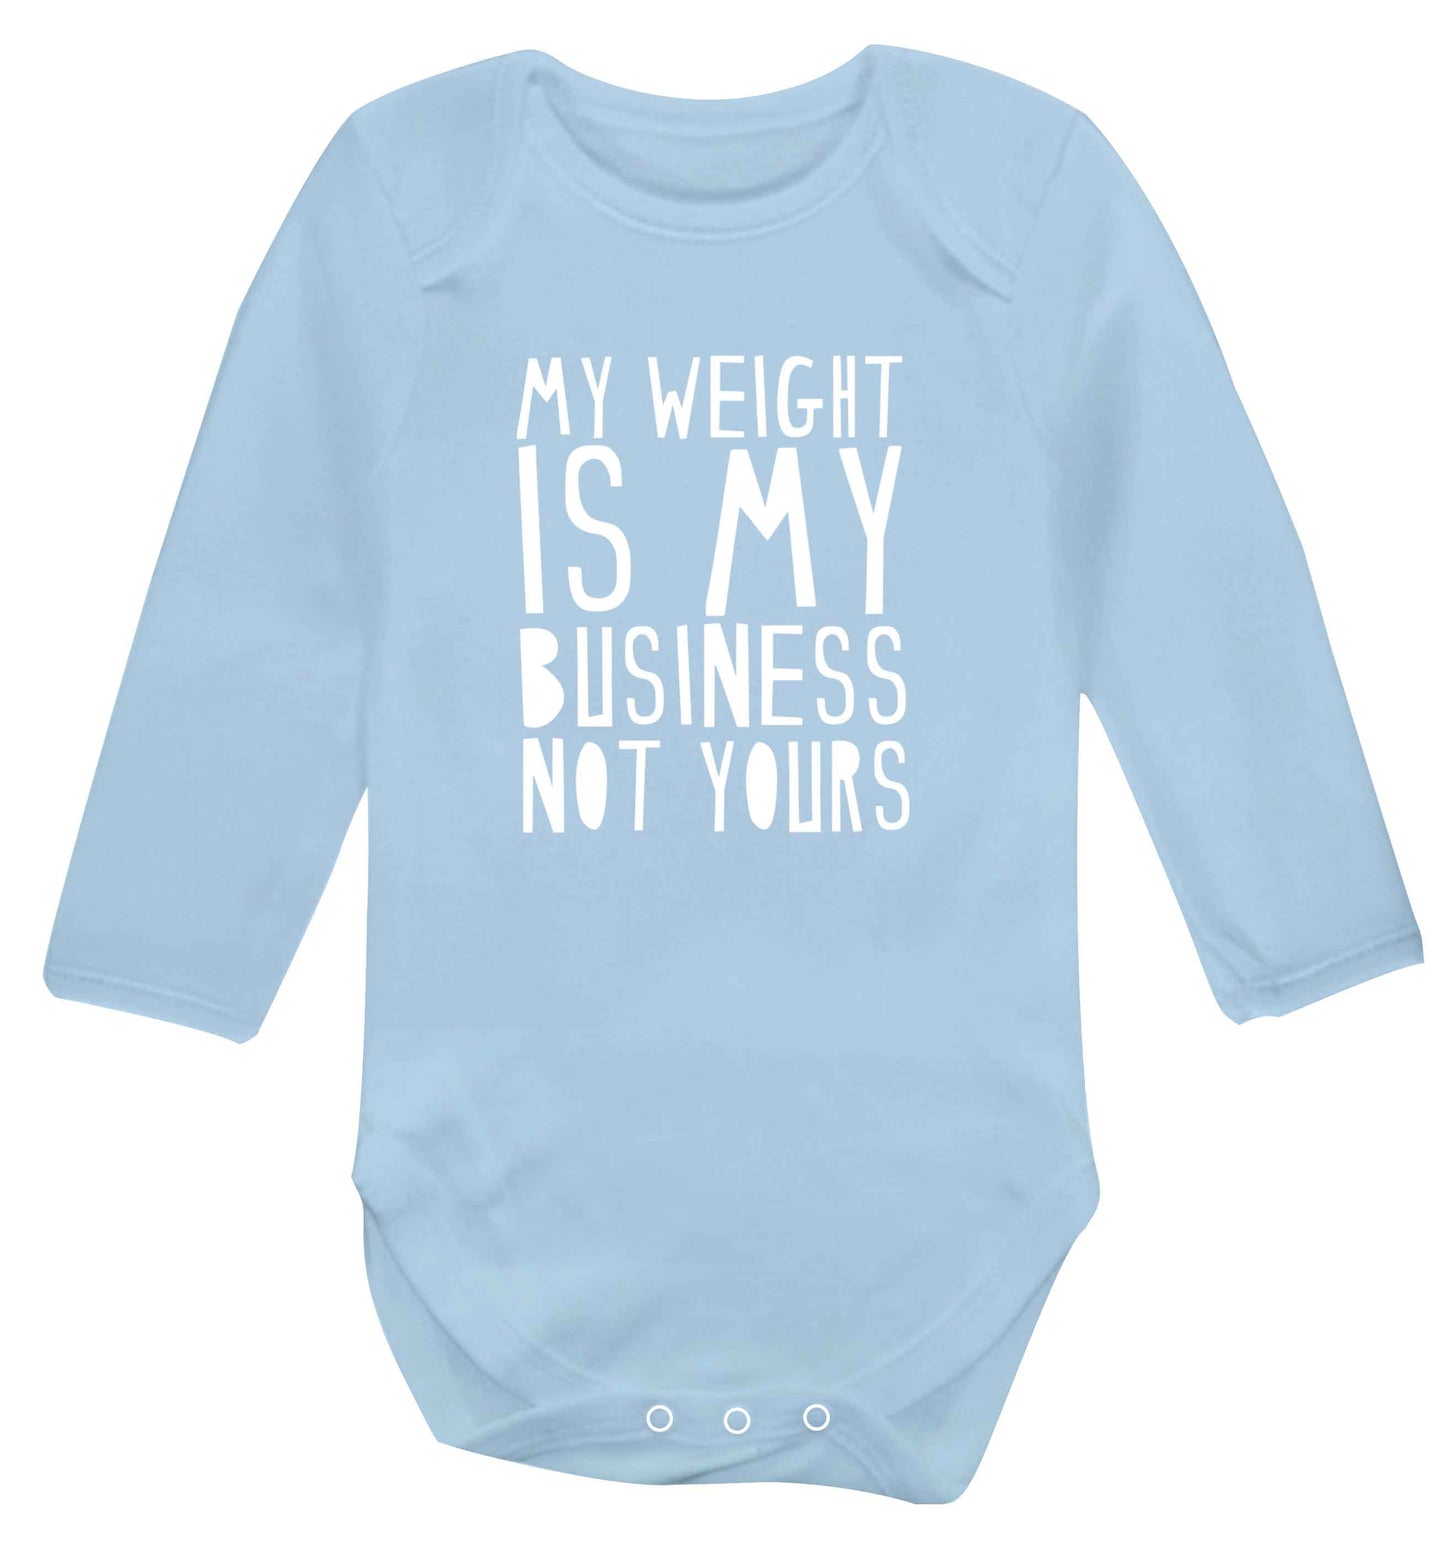 My weight is my business not yours baby vest long sleeved pale blue 6-12 months